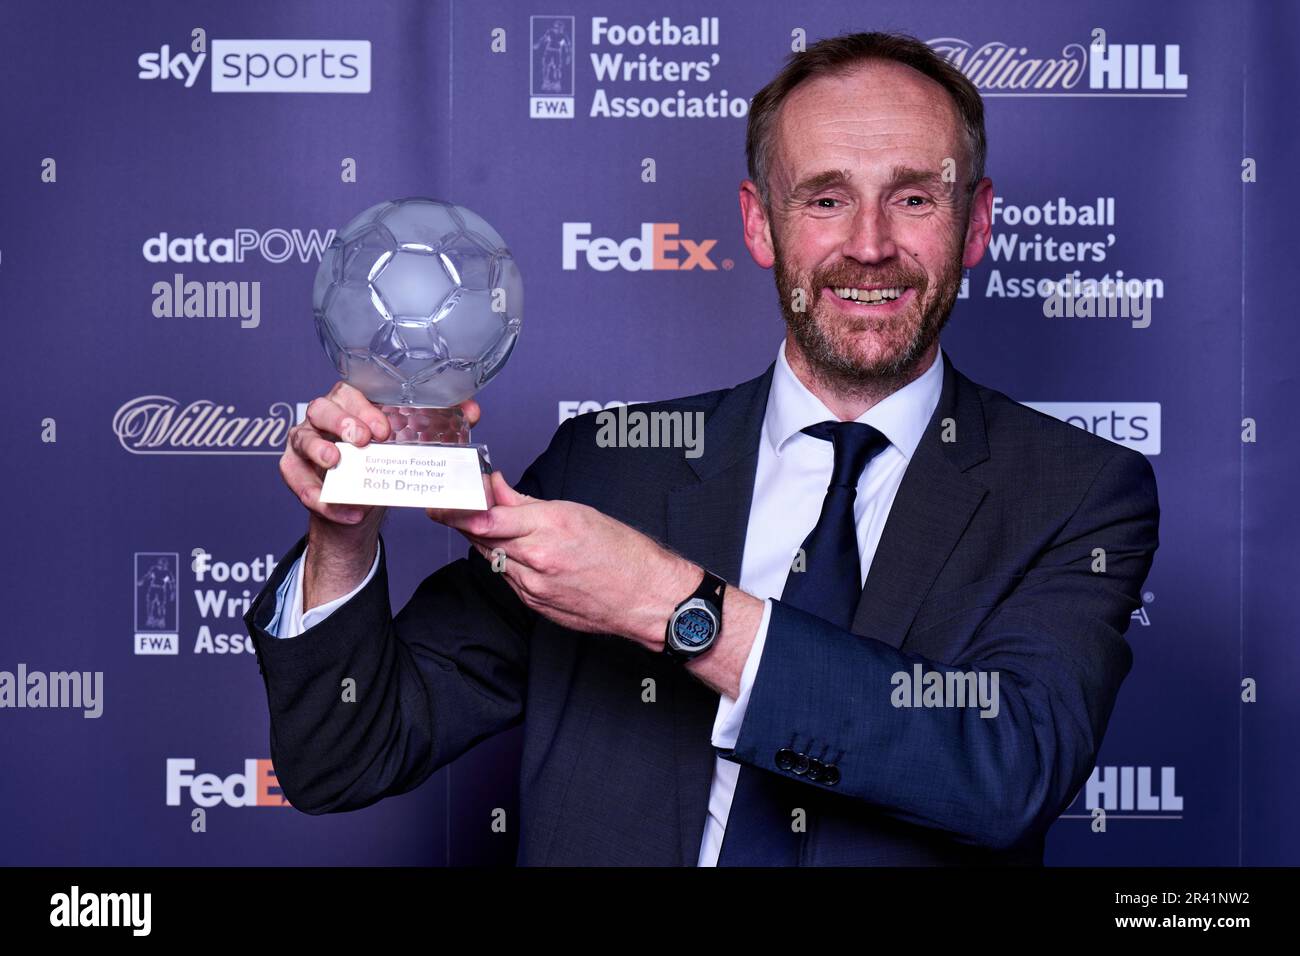 Kaat Vanderheyde (left) managing director of Brand and Sponsorship at FedEx Express Europe presents the Rob Draper of The Mail on Sunday with the European Football Writer of the year award during the FWA Footballer of the Year awards held at the Landmark Hotel, London. Picture date: Thursday May 25, 2023. Stock Photo